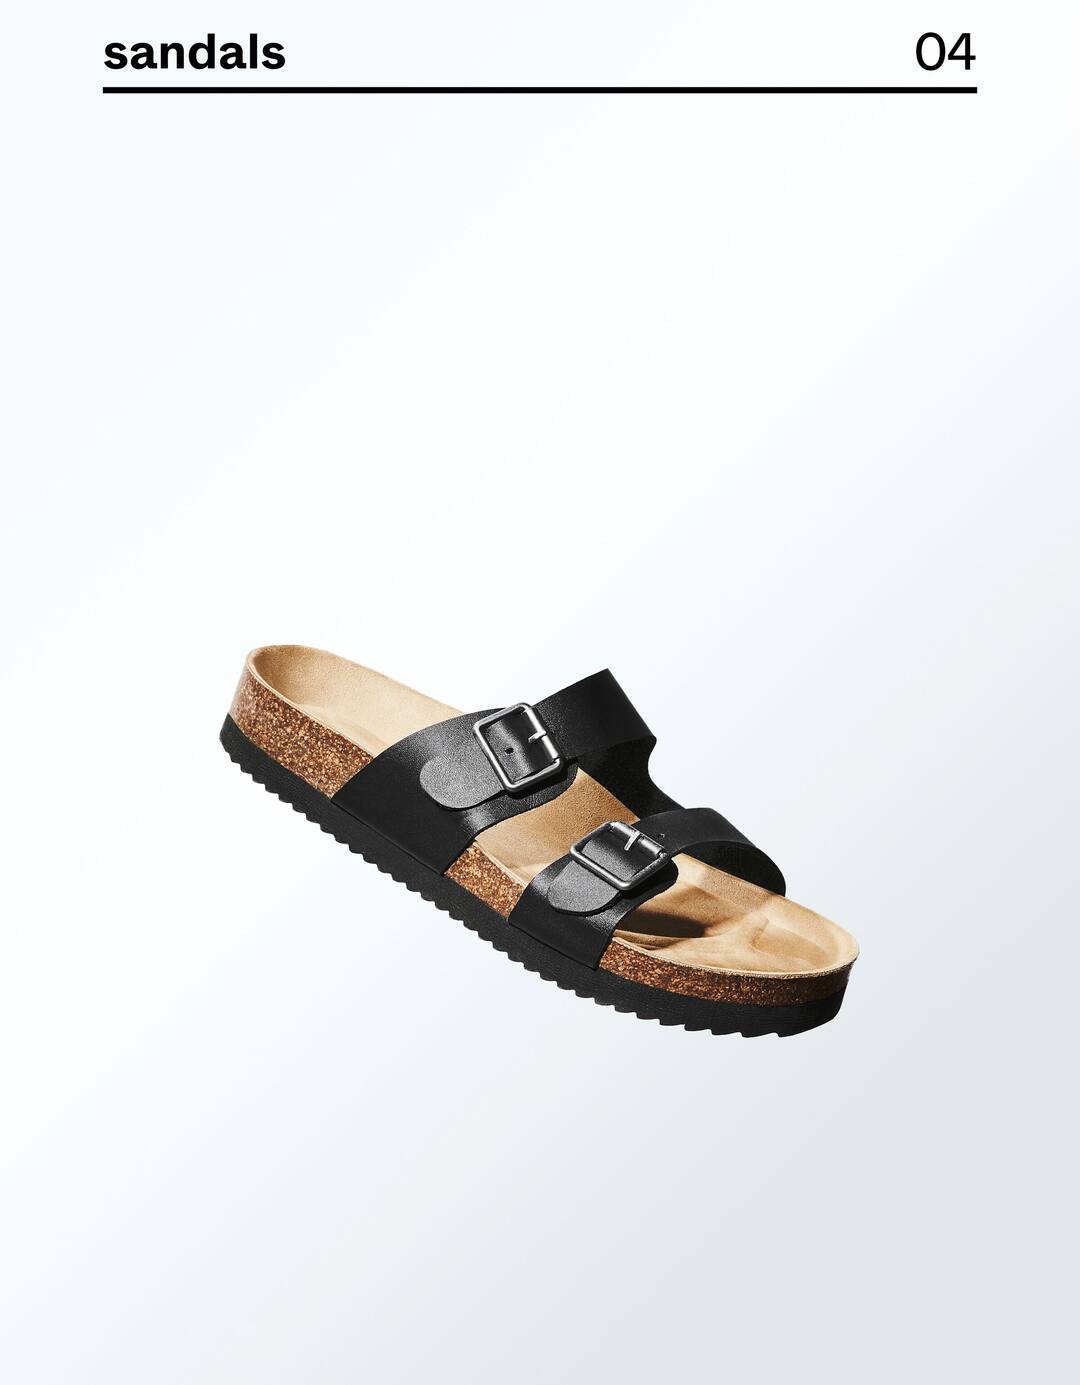 Men’s LEATHER sandals with buckles